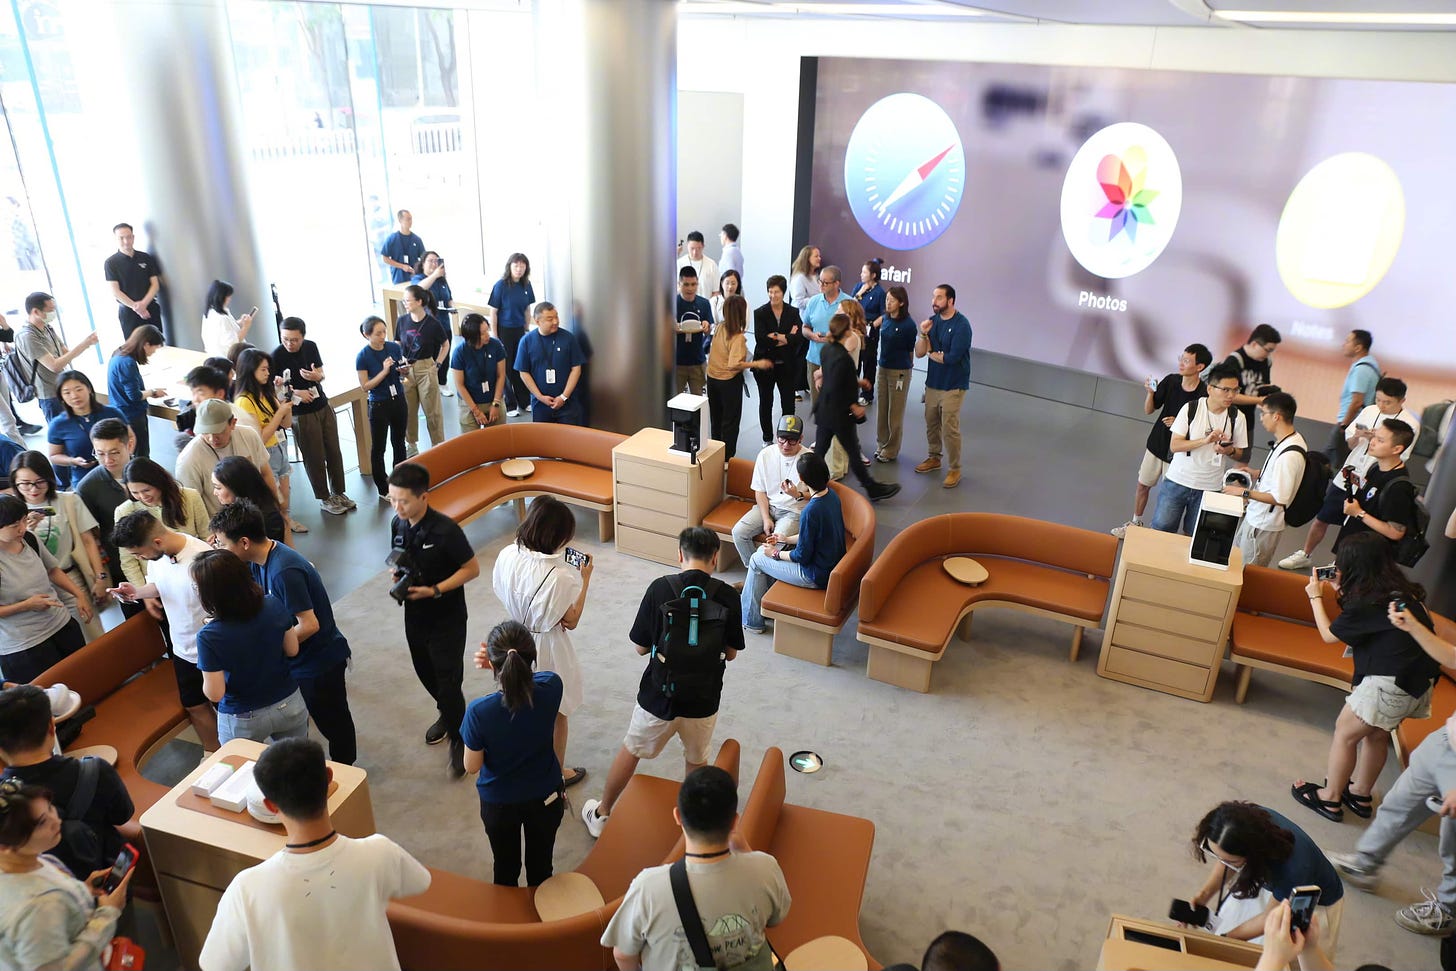 The Demo Zone at Apple Wangfujing. Two sets of sofas are placed in front of the video wall.